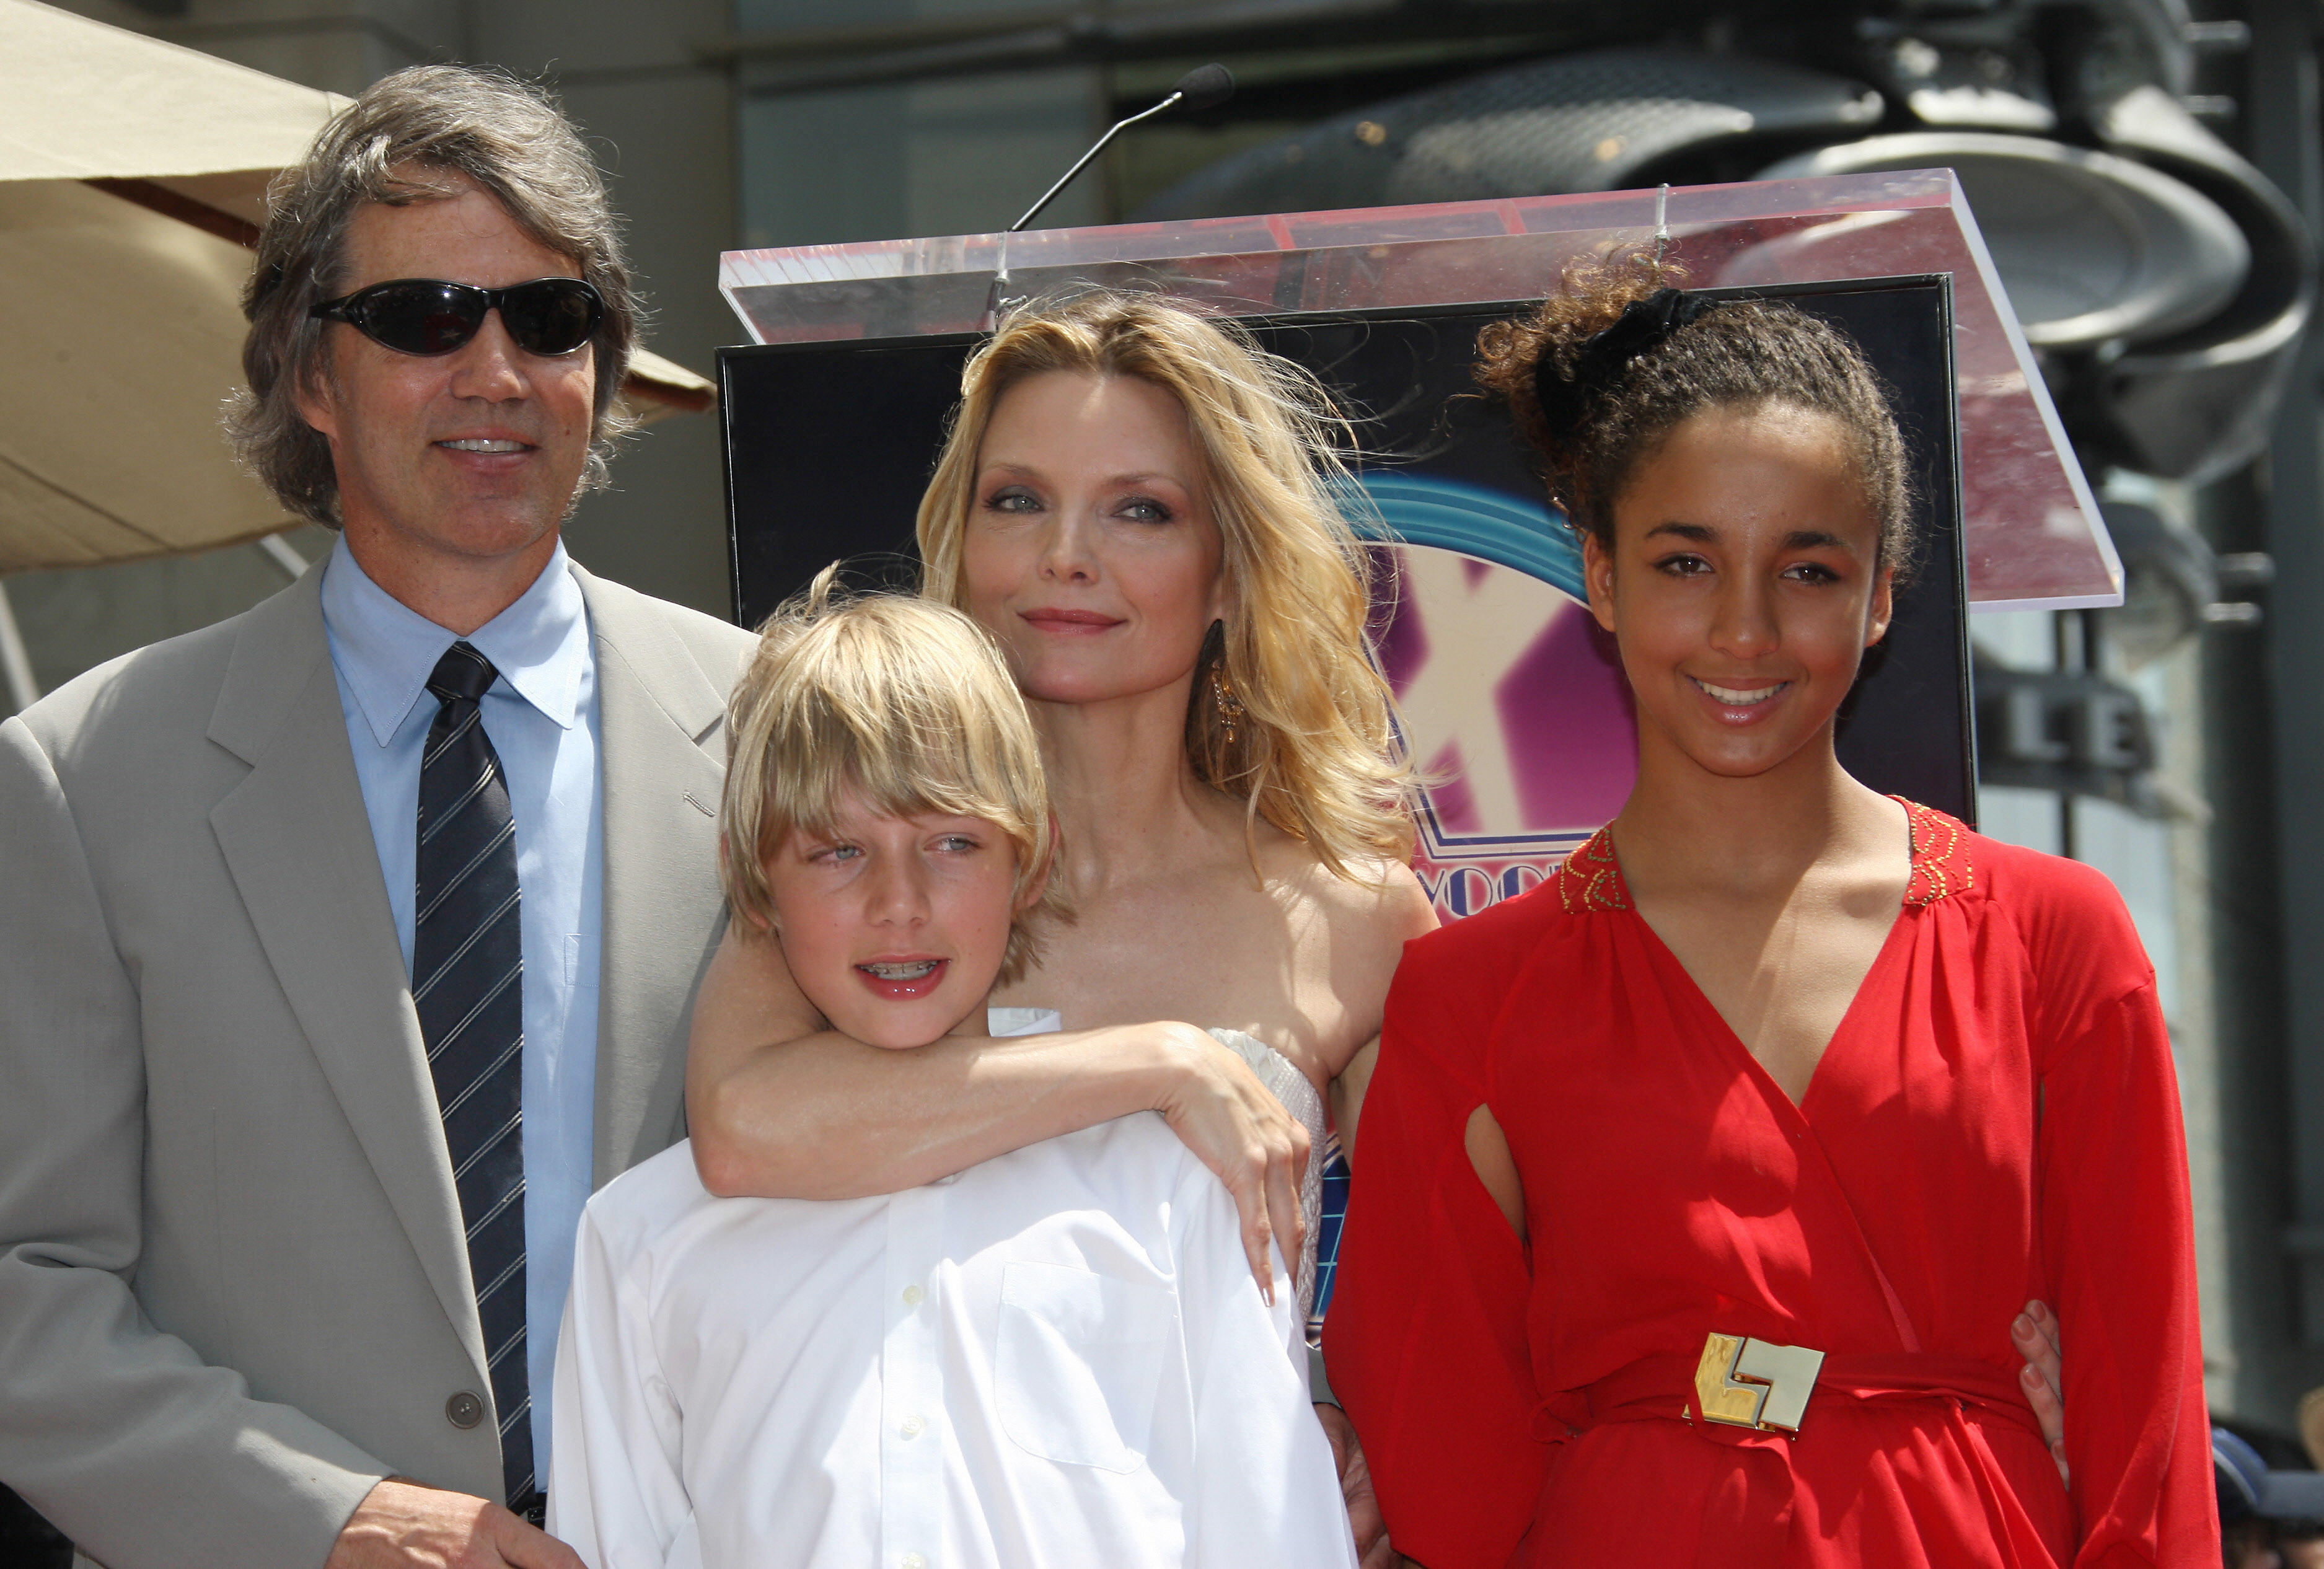 Michelle Pfeiffer with her daughter Claudia, her son John, and her husband David E. Kelley after the actress's star was unveiled on the Hollywood Walk of Fame on August 6, 2007, in Hollywood, California | Source: Getty Images